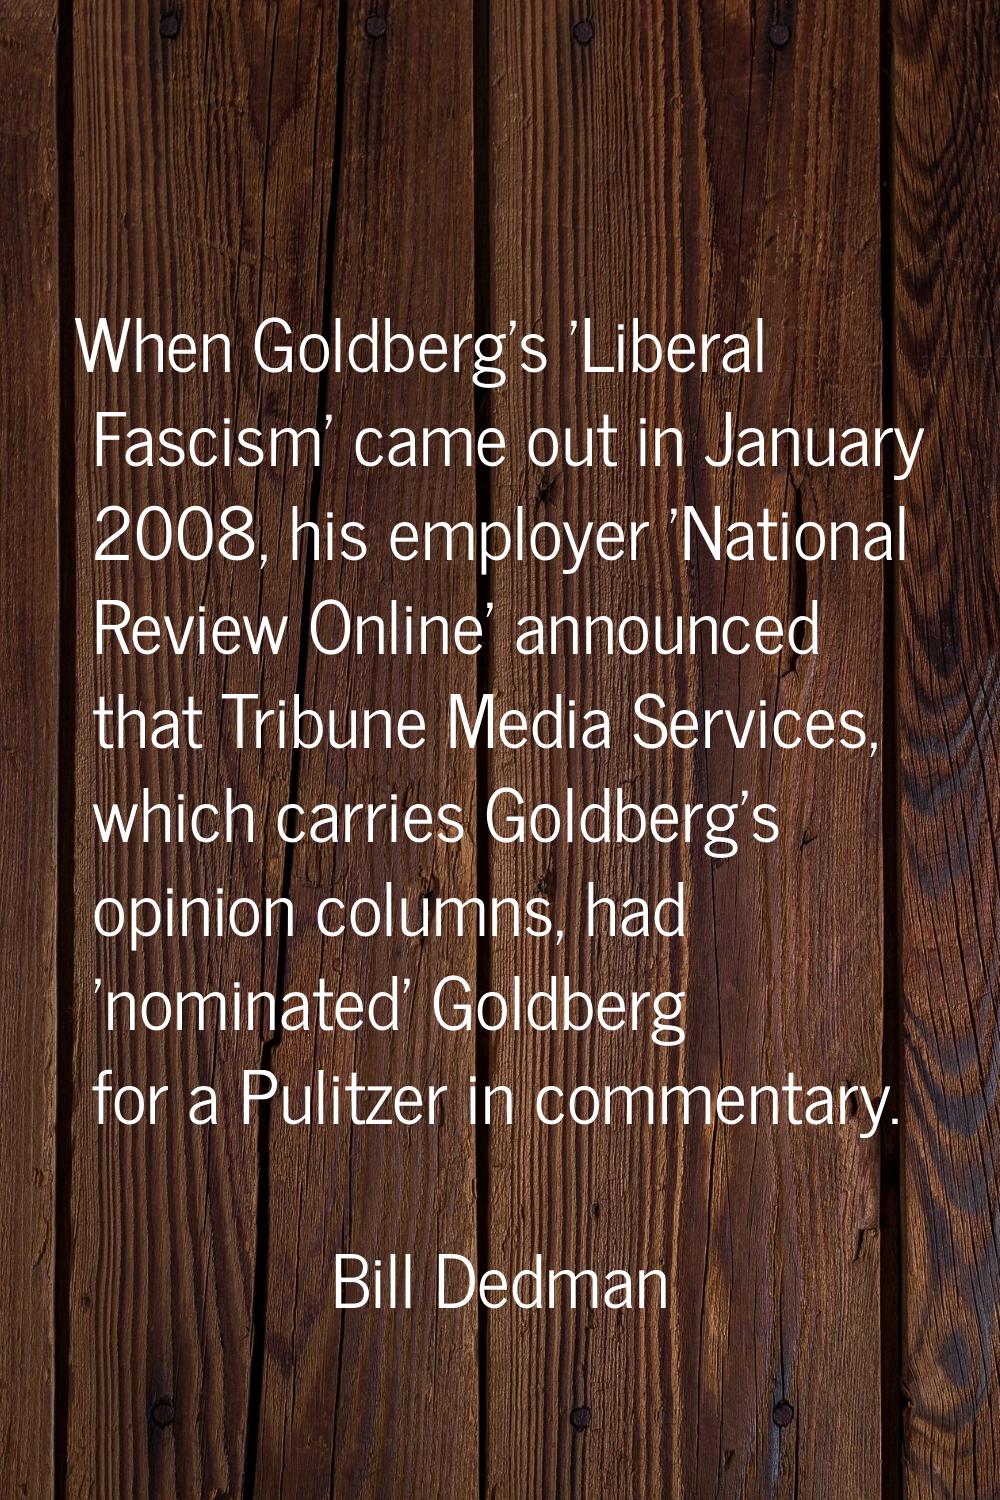 When Goldberg's 'Liberal Fascism' came out in January 2008, his employer 'National Review Online' a